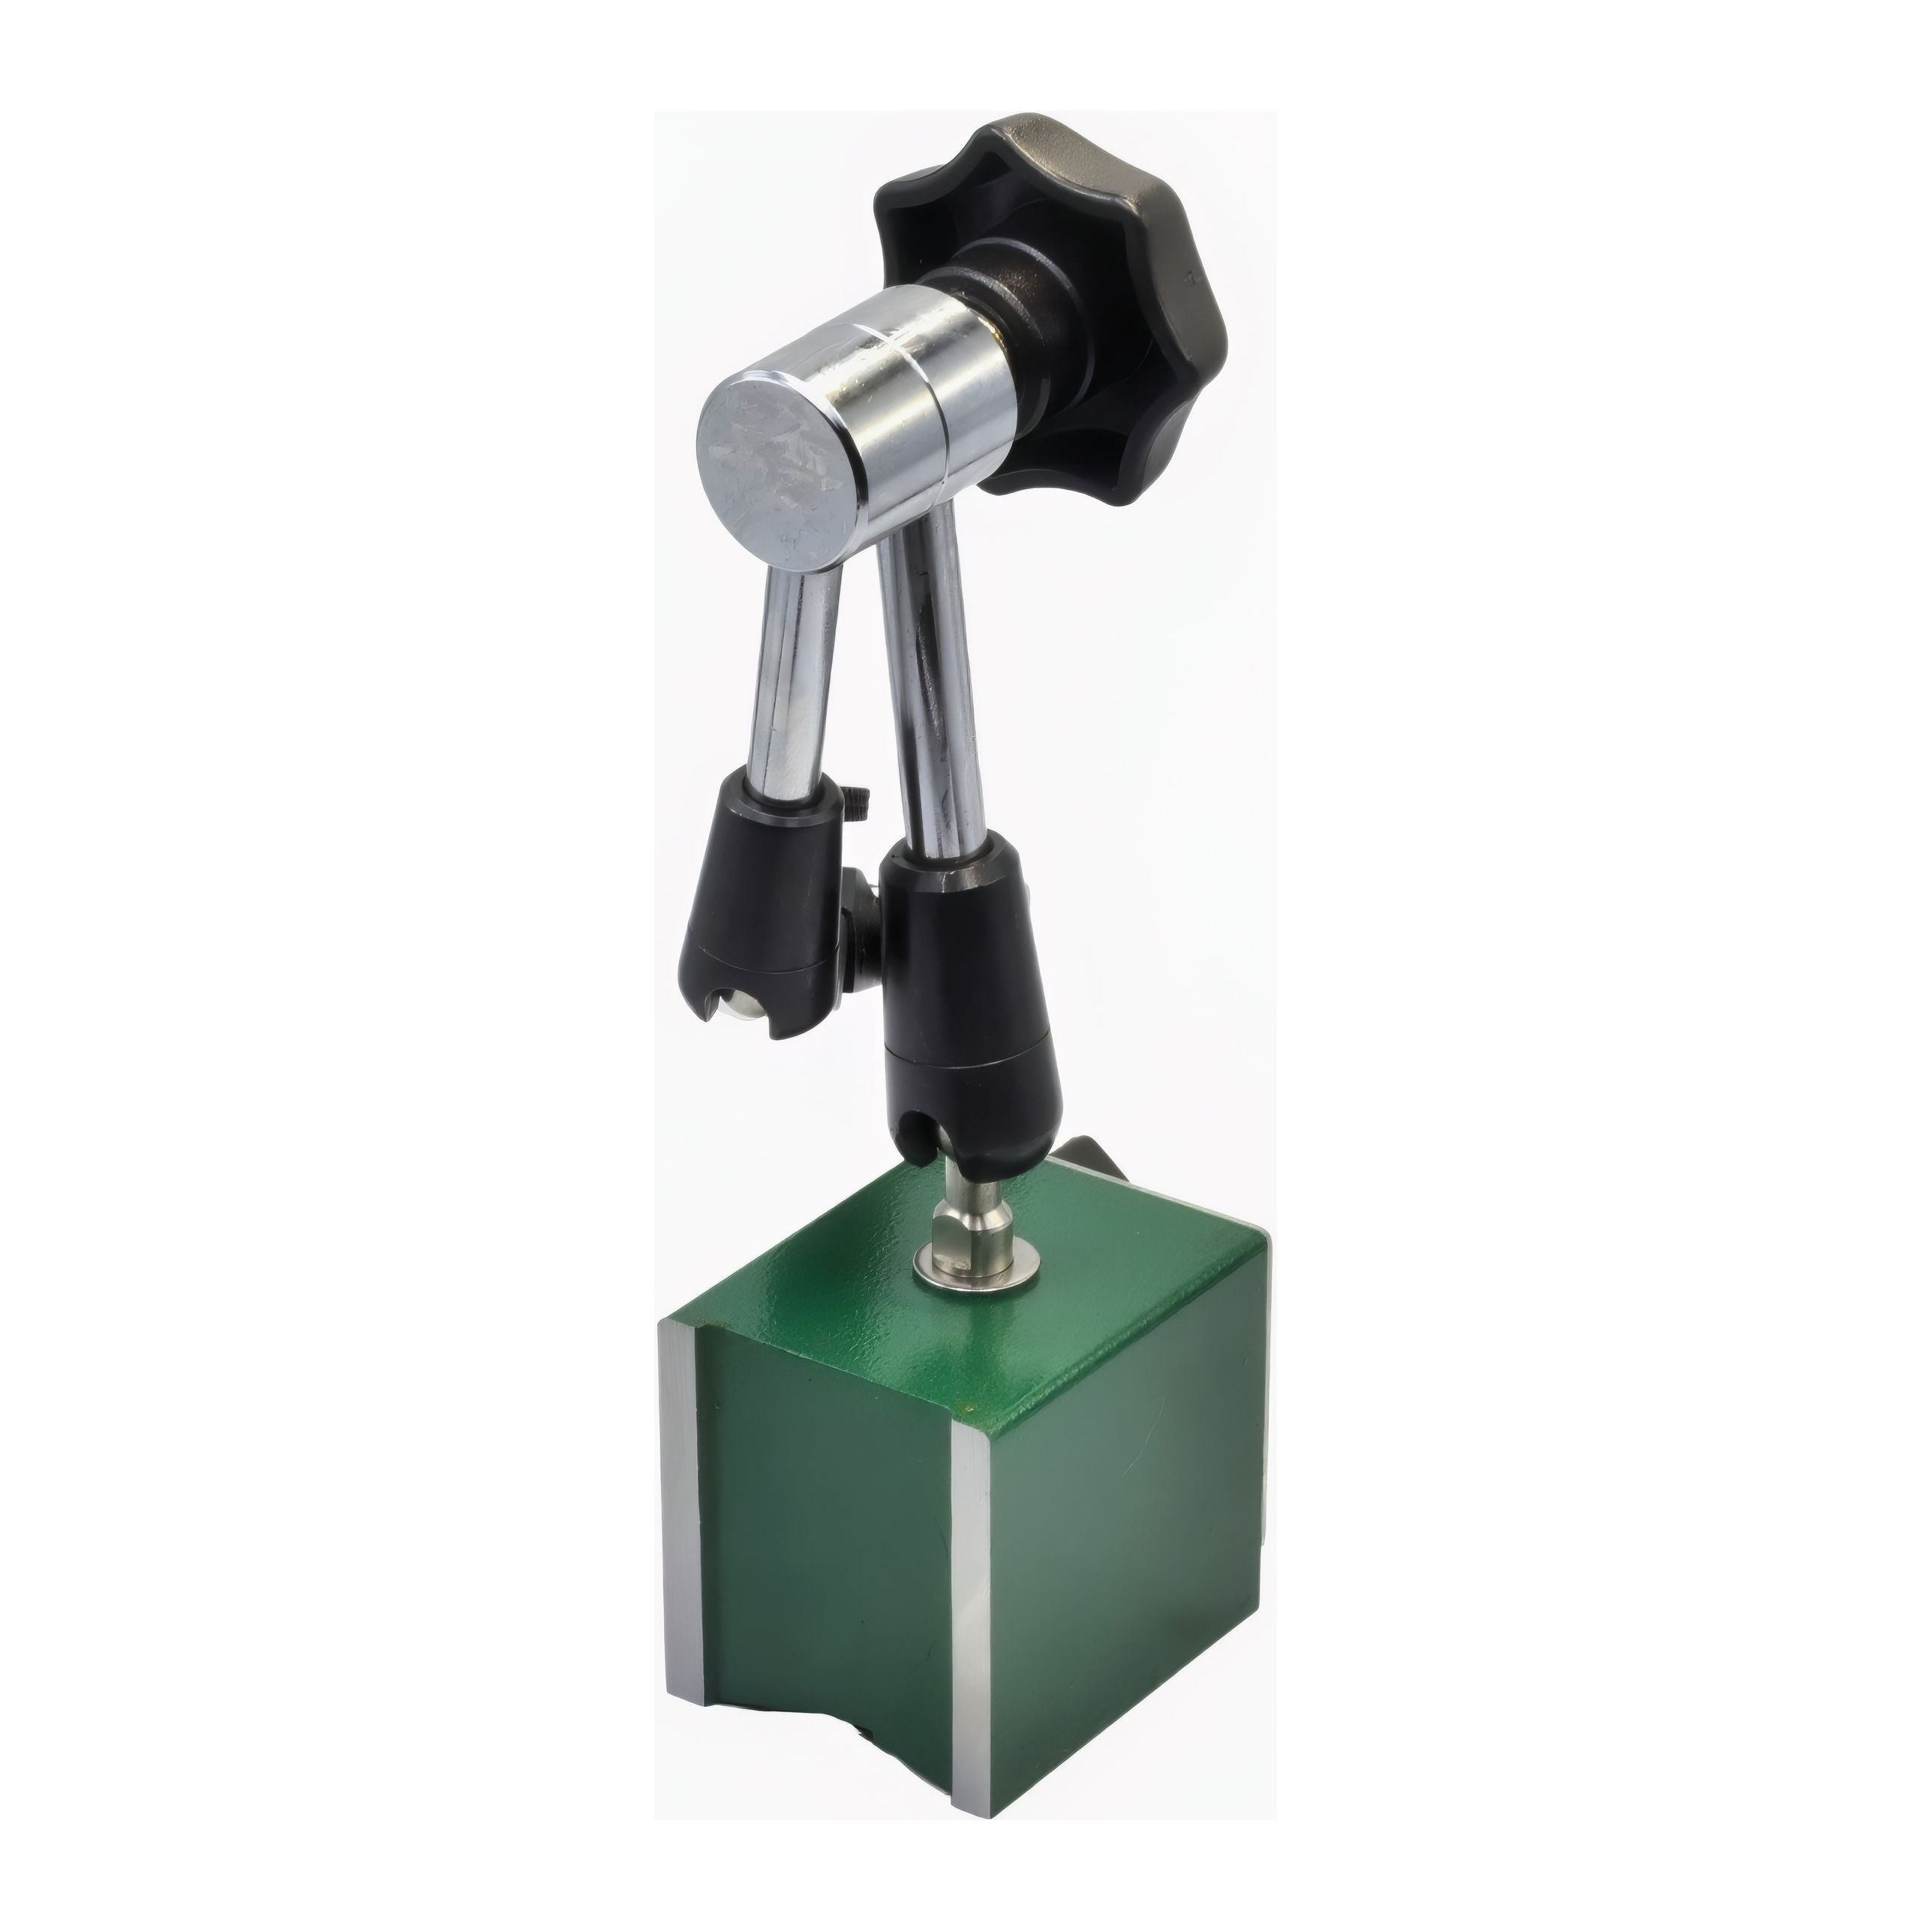 Insize Mechanical Lock Magnetic Stand 80 kg Force Series 6210-81